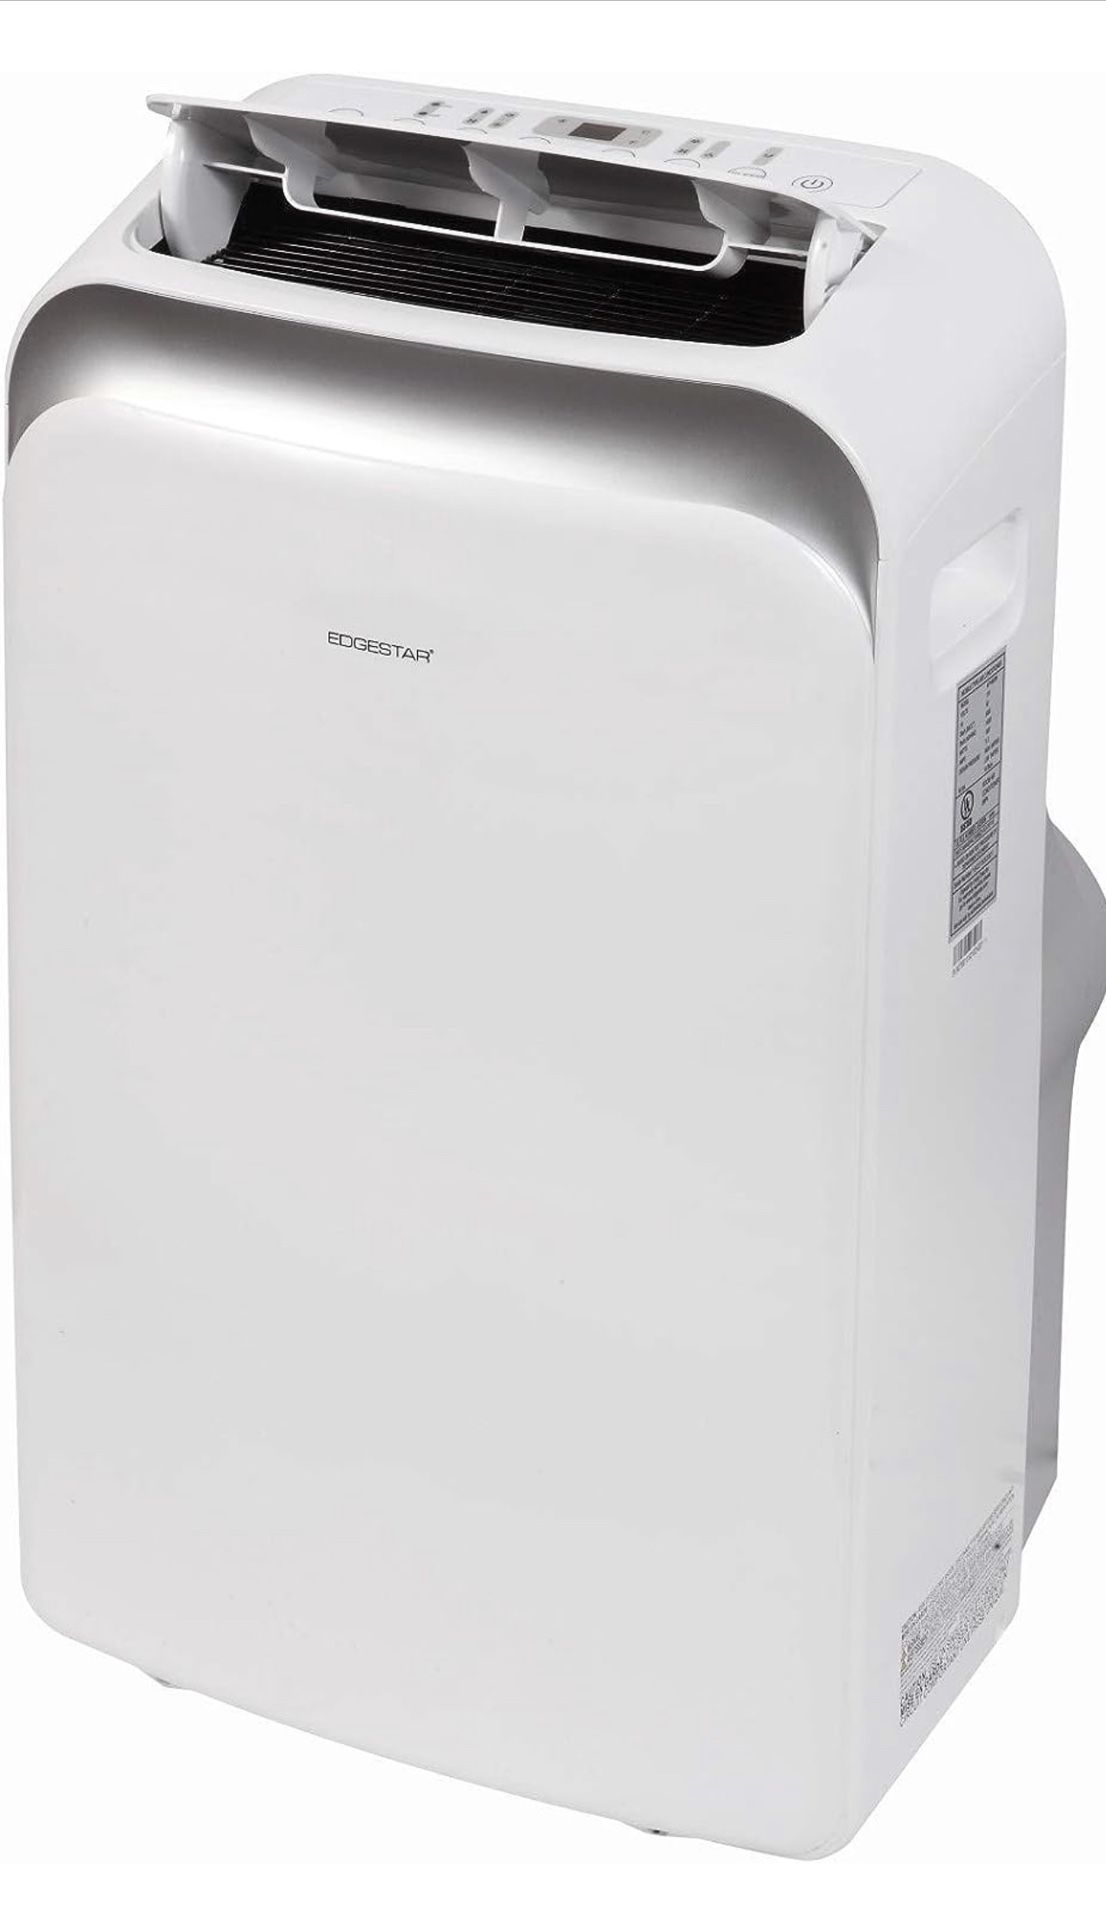  Portable Air Conditioner with Dehumidifier and Fan for Rooms up to 550 Sq. Ft. with Remote Control